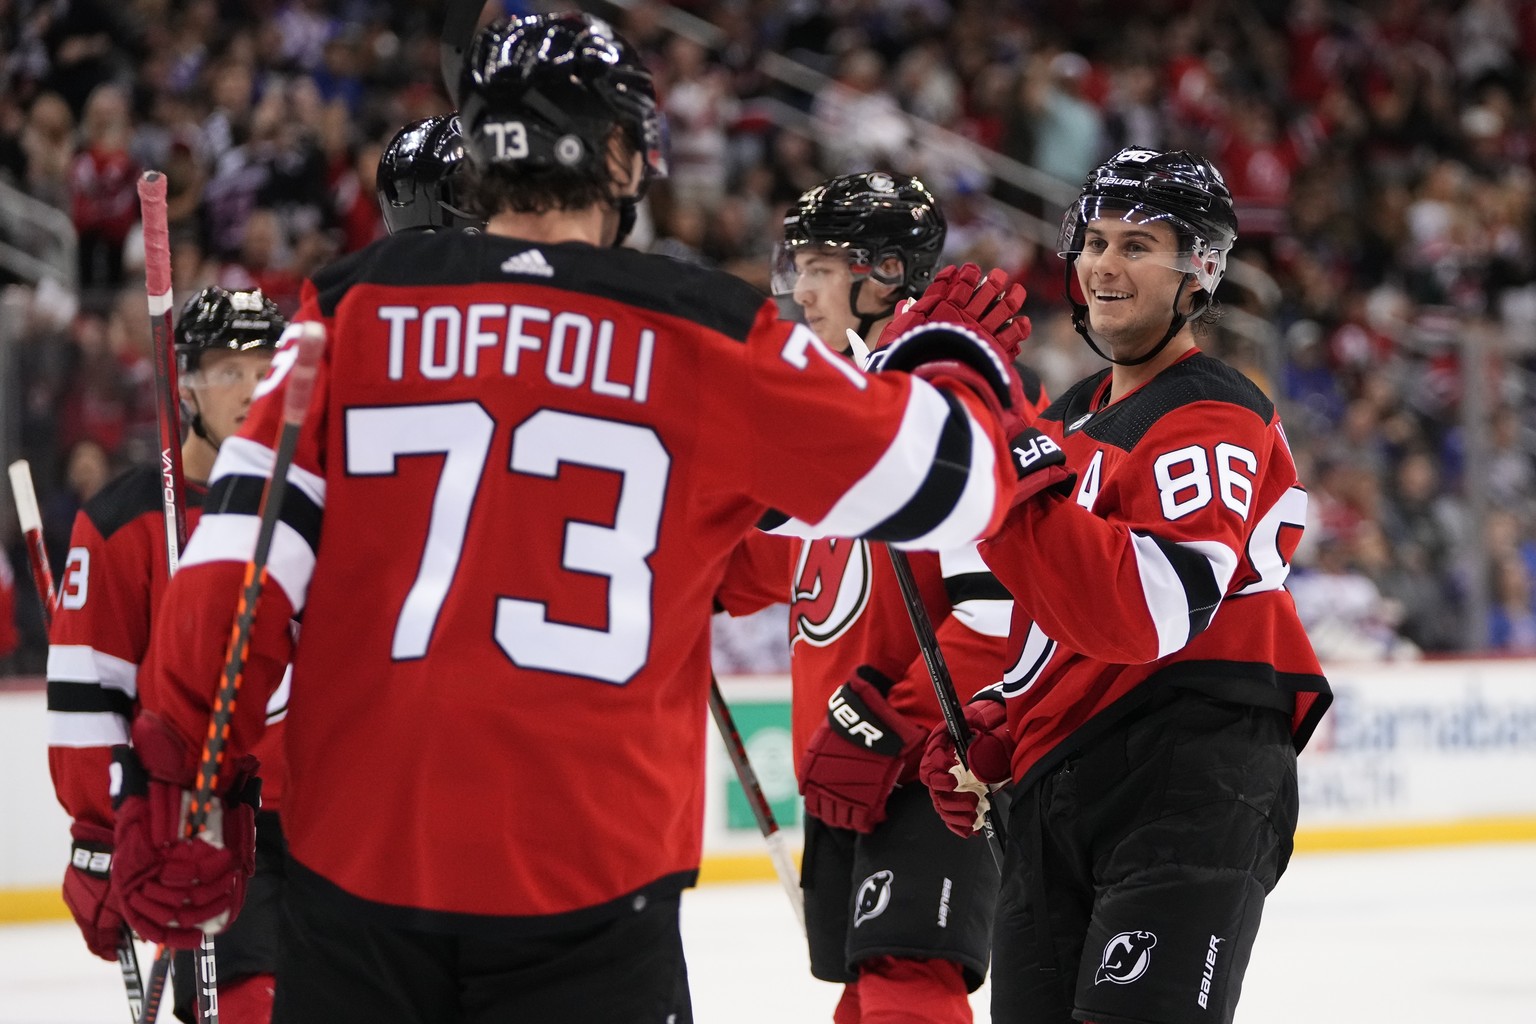 New Jersey Devils&#039; Jack Hughes (86) smiles as he celebrates with Tyler Toffoli (73) after scoring a goal against the New York Rangers during the second period of an NHL preseason hockey game Wedn ...